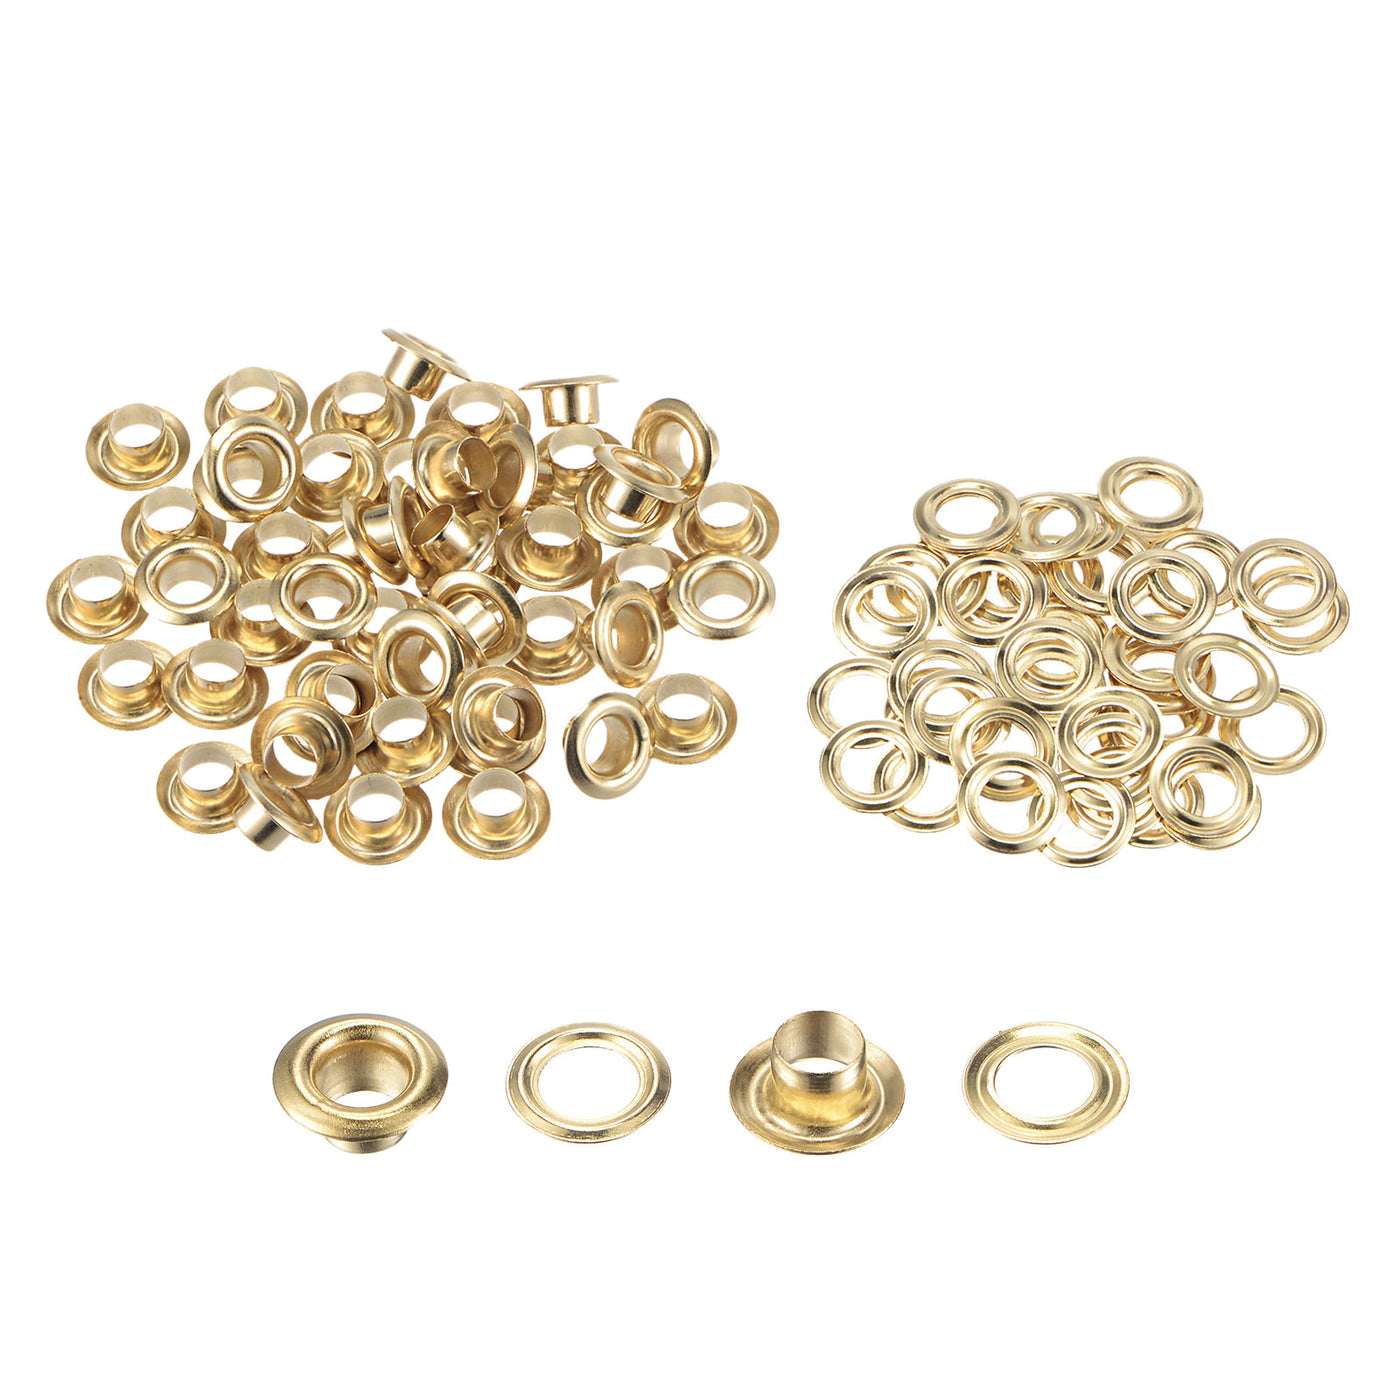 uxcell Uxcell 50Set 5.5mm Hole Copper Grommets Eyelets Gold Tone for Fabric Leather